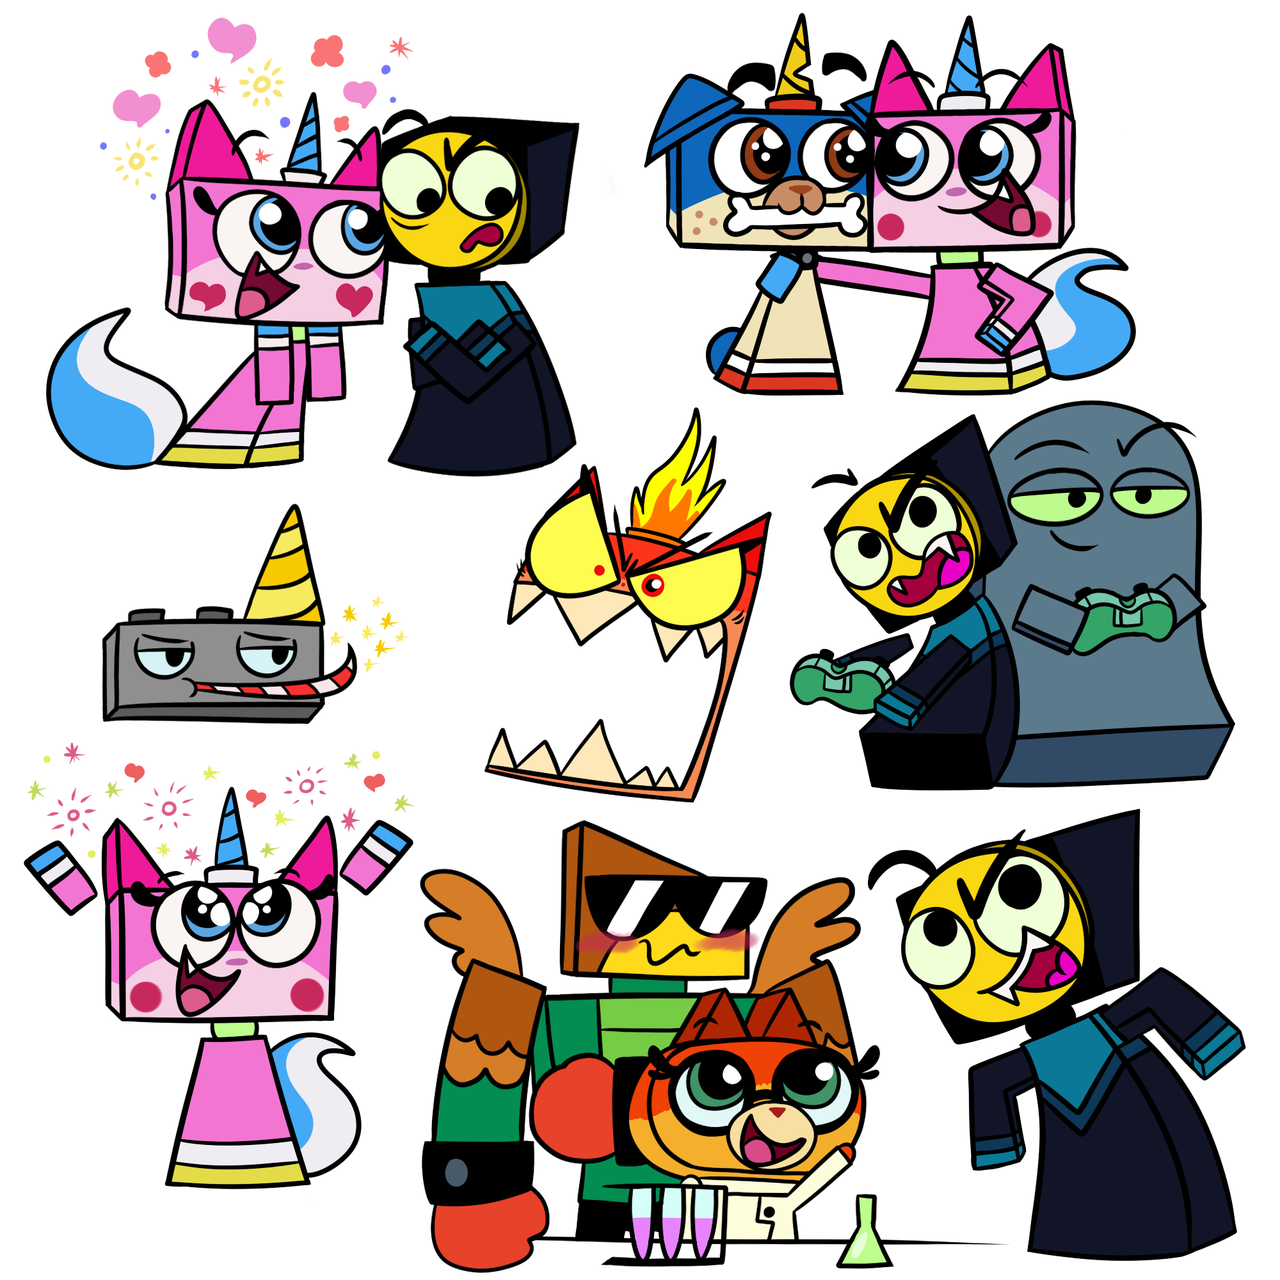 Cats are so cool — Guess who watched new Unikitty! show and liked it...